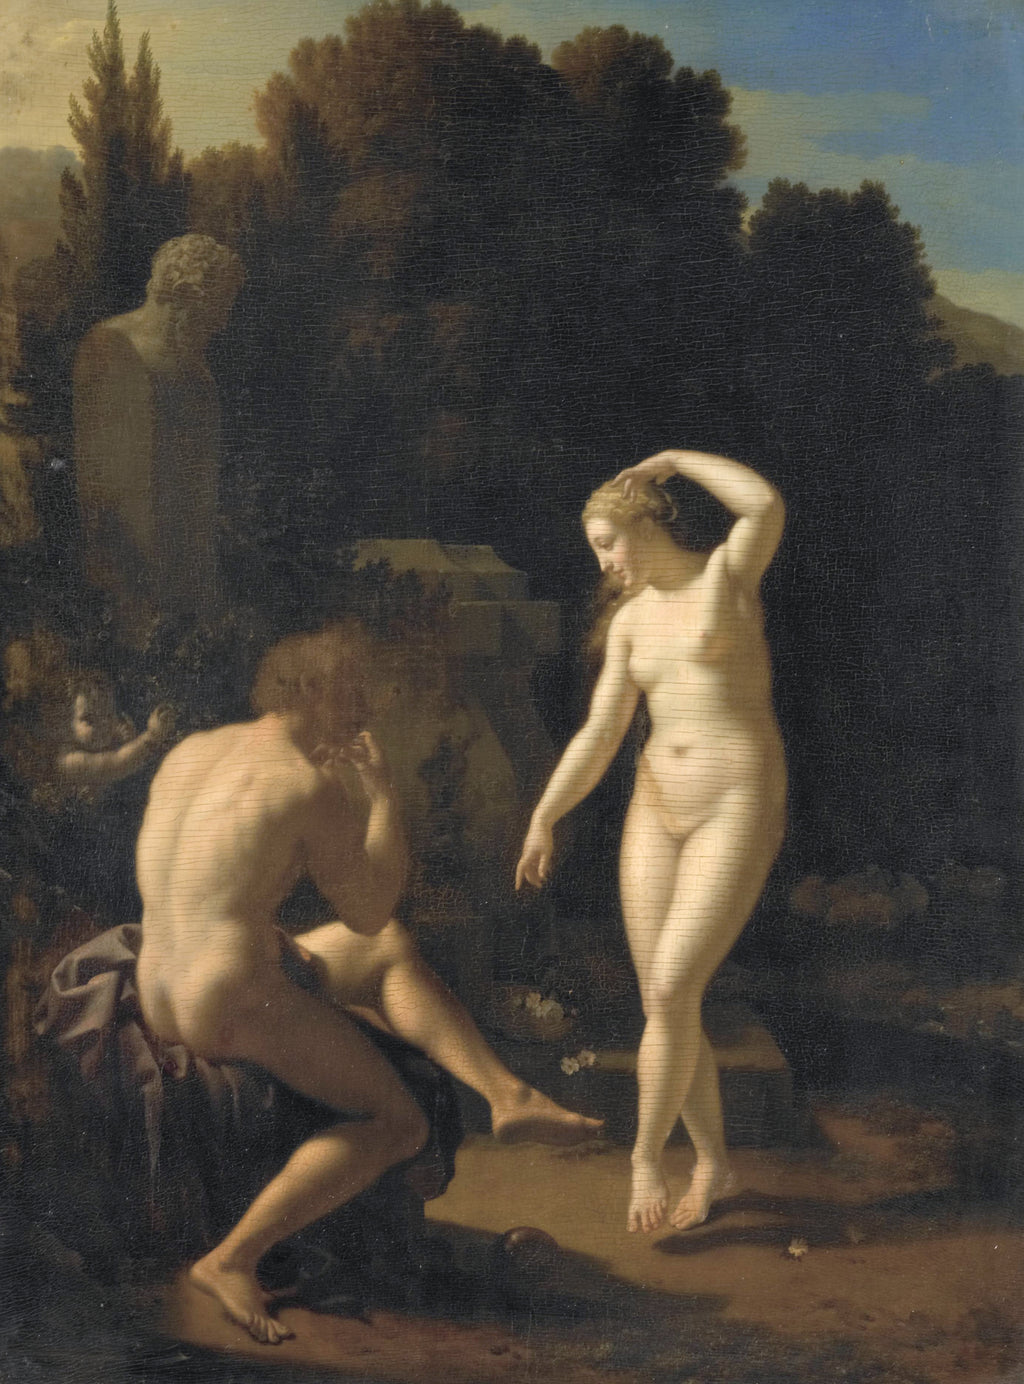 A nymph dancing before a shepherd playing a flute